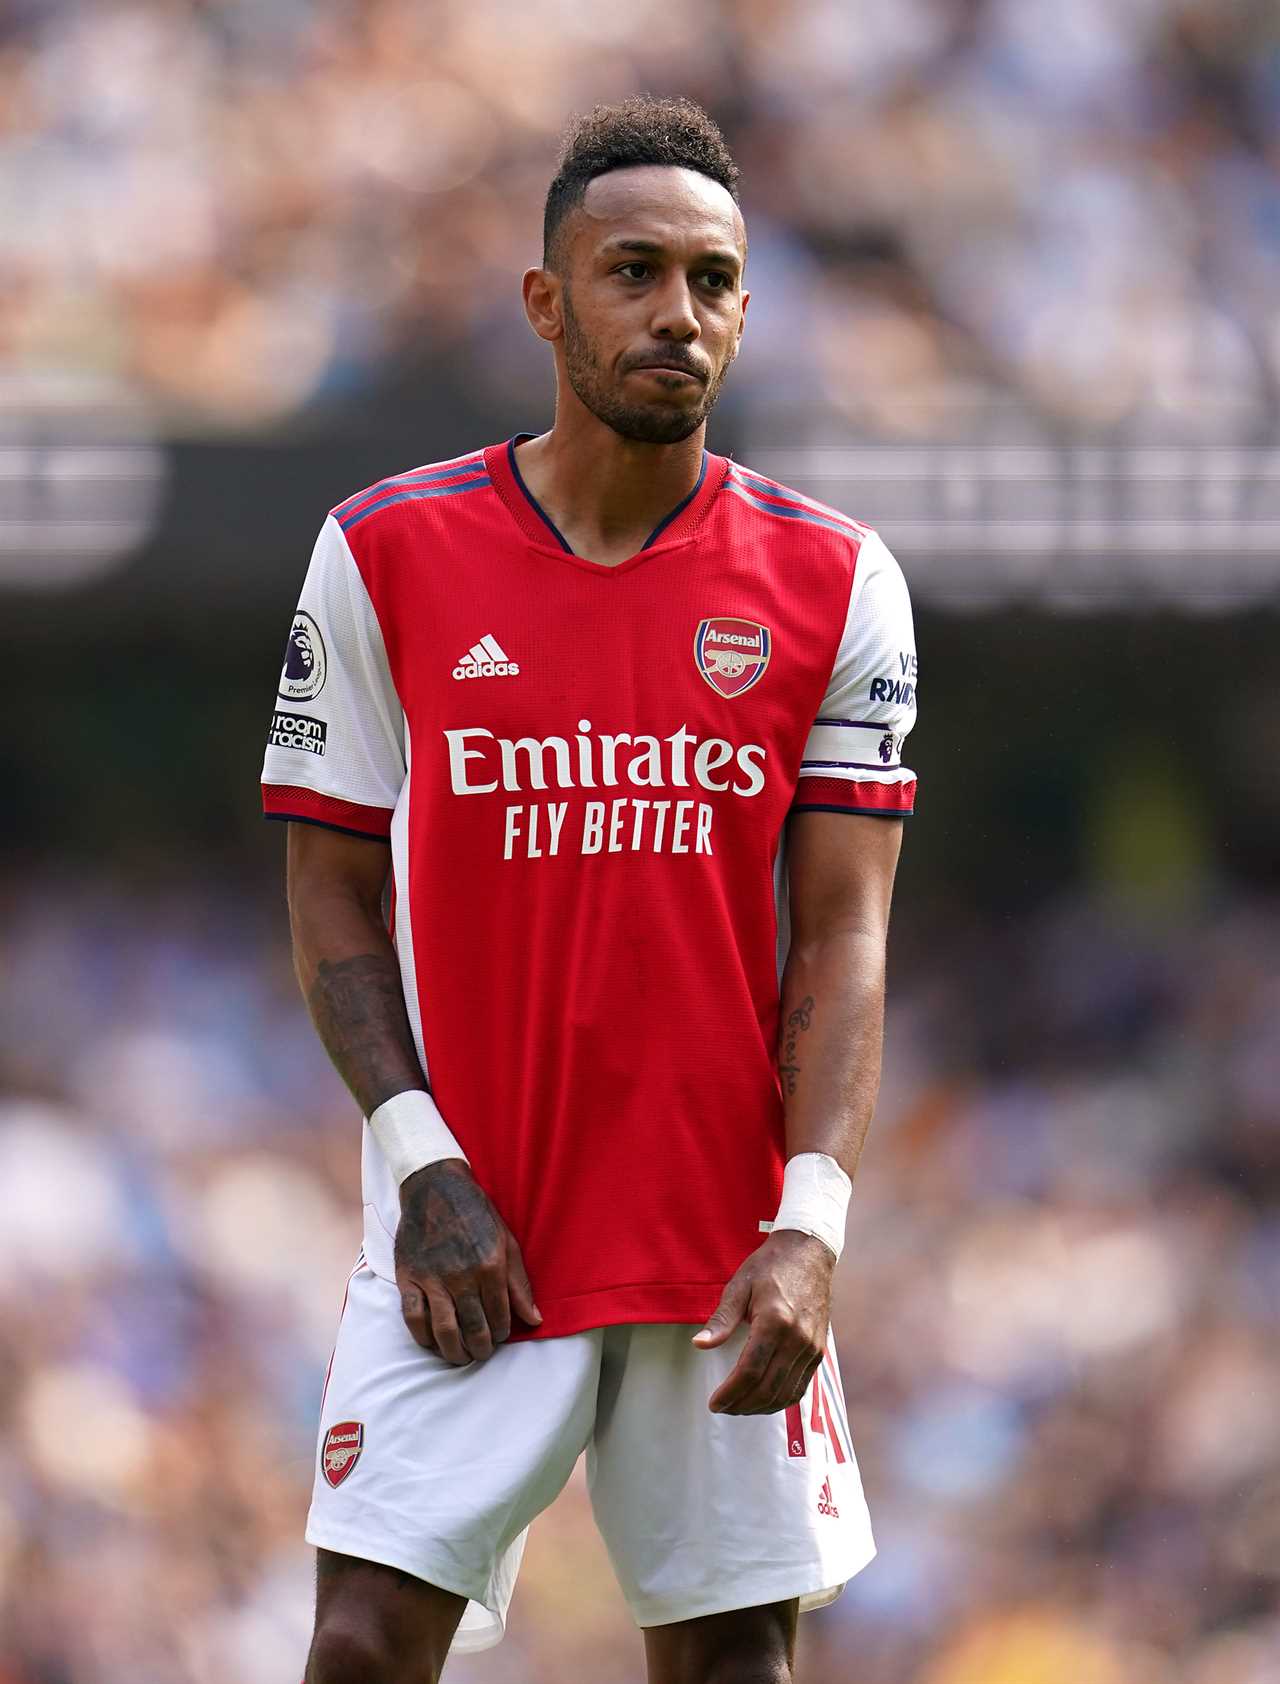 Arsenal star Pierre-Emerick Aubameyang suffering from minor heart problems related to Covid and out of Gabon vs Ghana